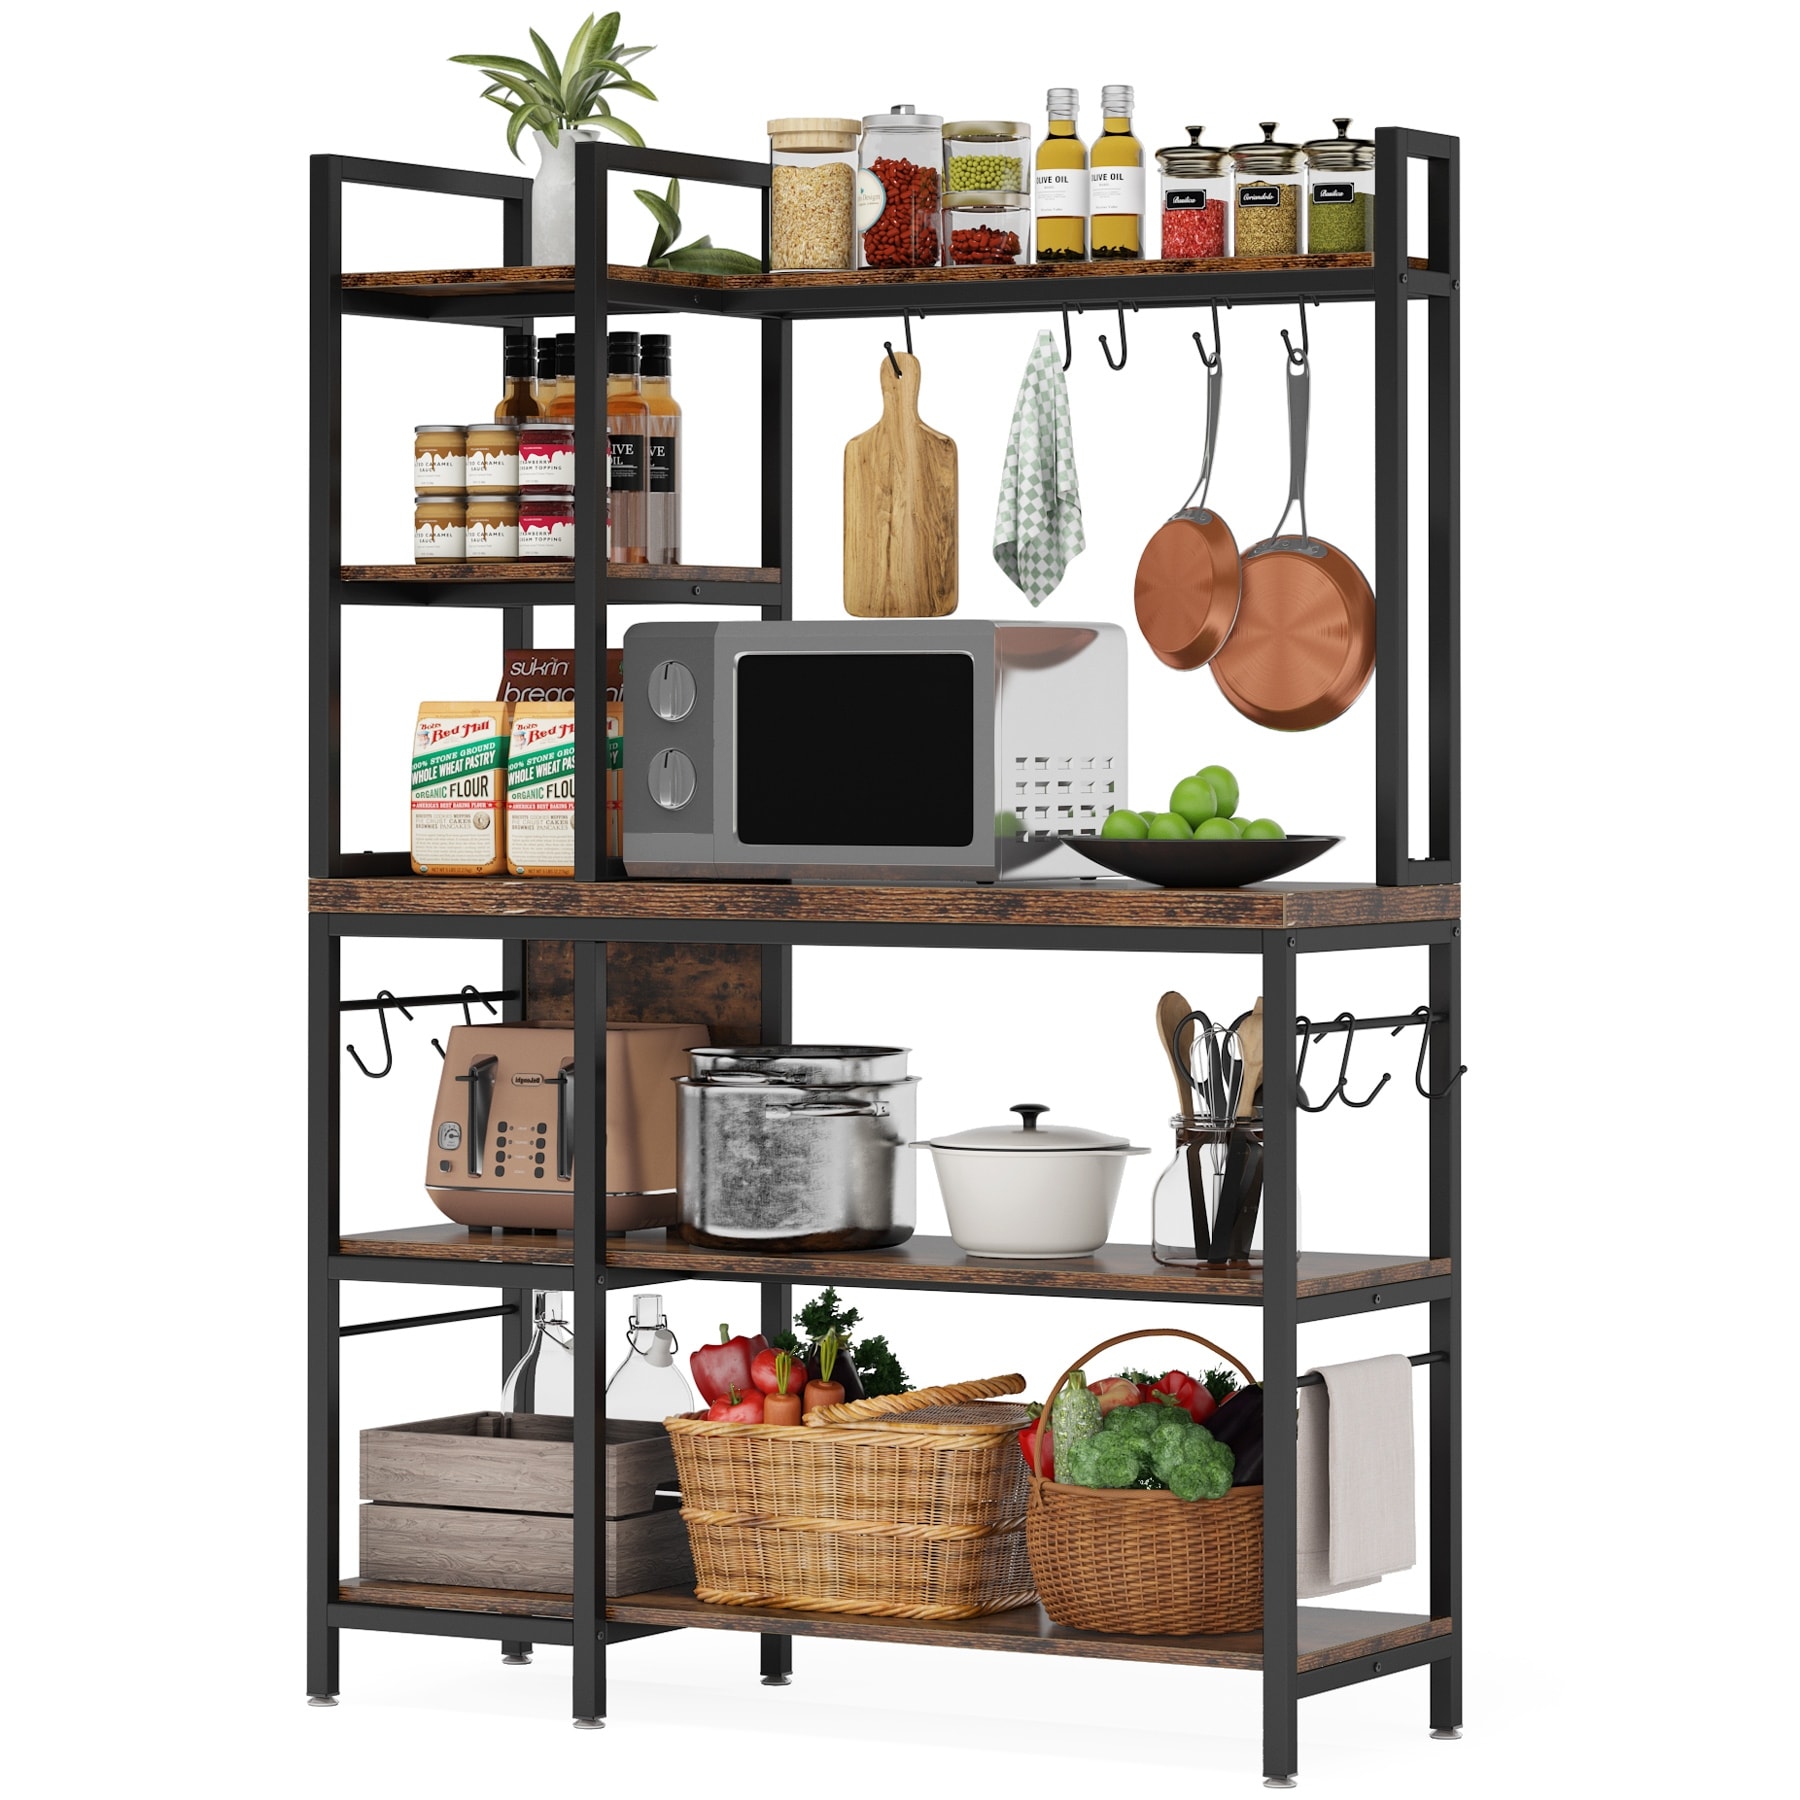 https://ak1.ostkcdn.com/images/products/is/images/direct/6fd381cec6ff32a08bbf6b01370717f72fc0e084/Kitchen-Bakers-Rack-with-Storage%2C-43-inch-Microwave-Stand-5-Tier-Kitchen-Utility-Storage-Shelf.jpg